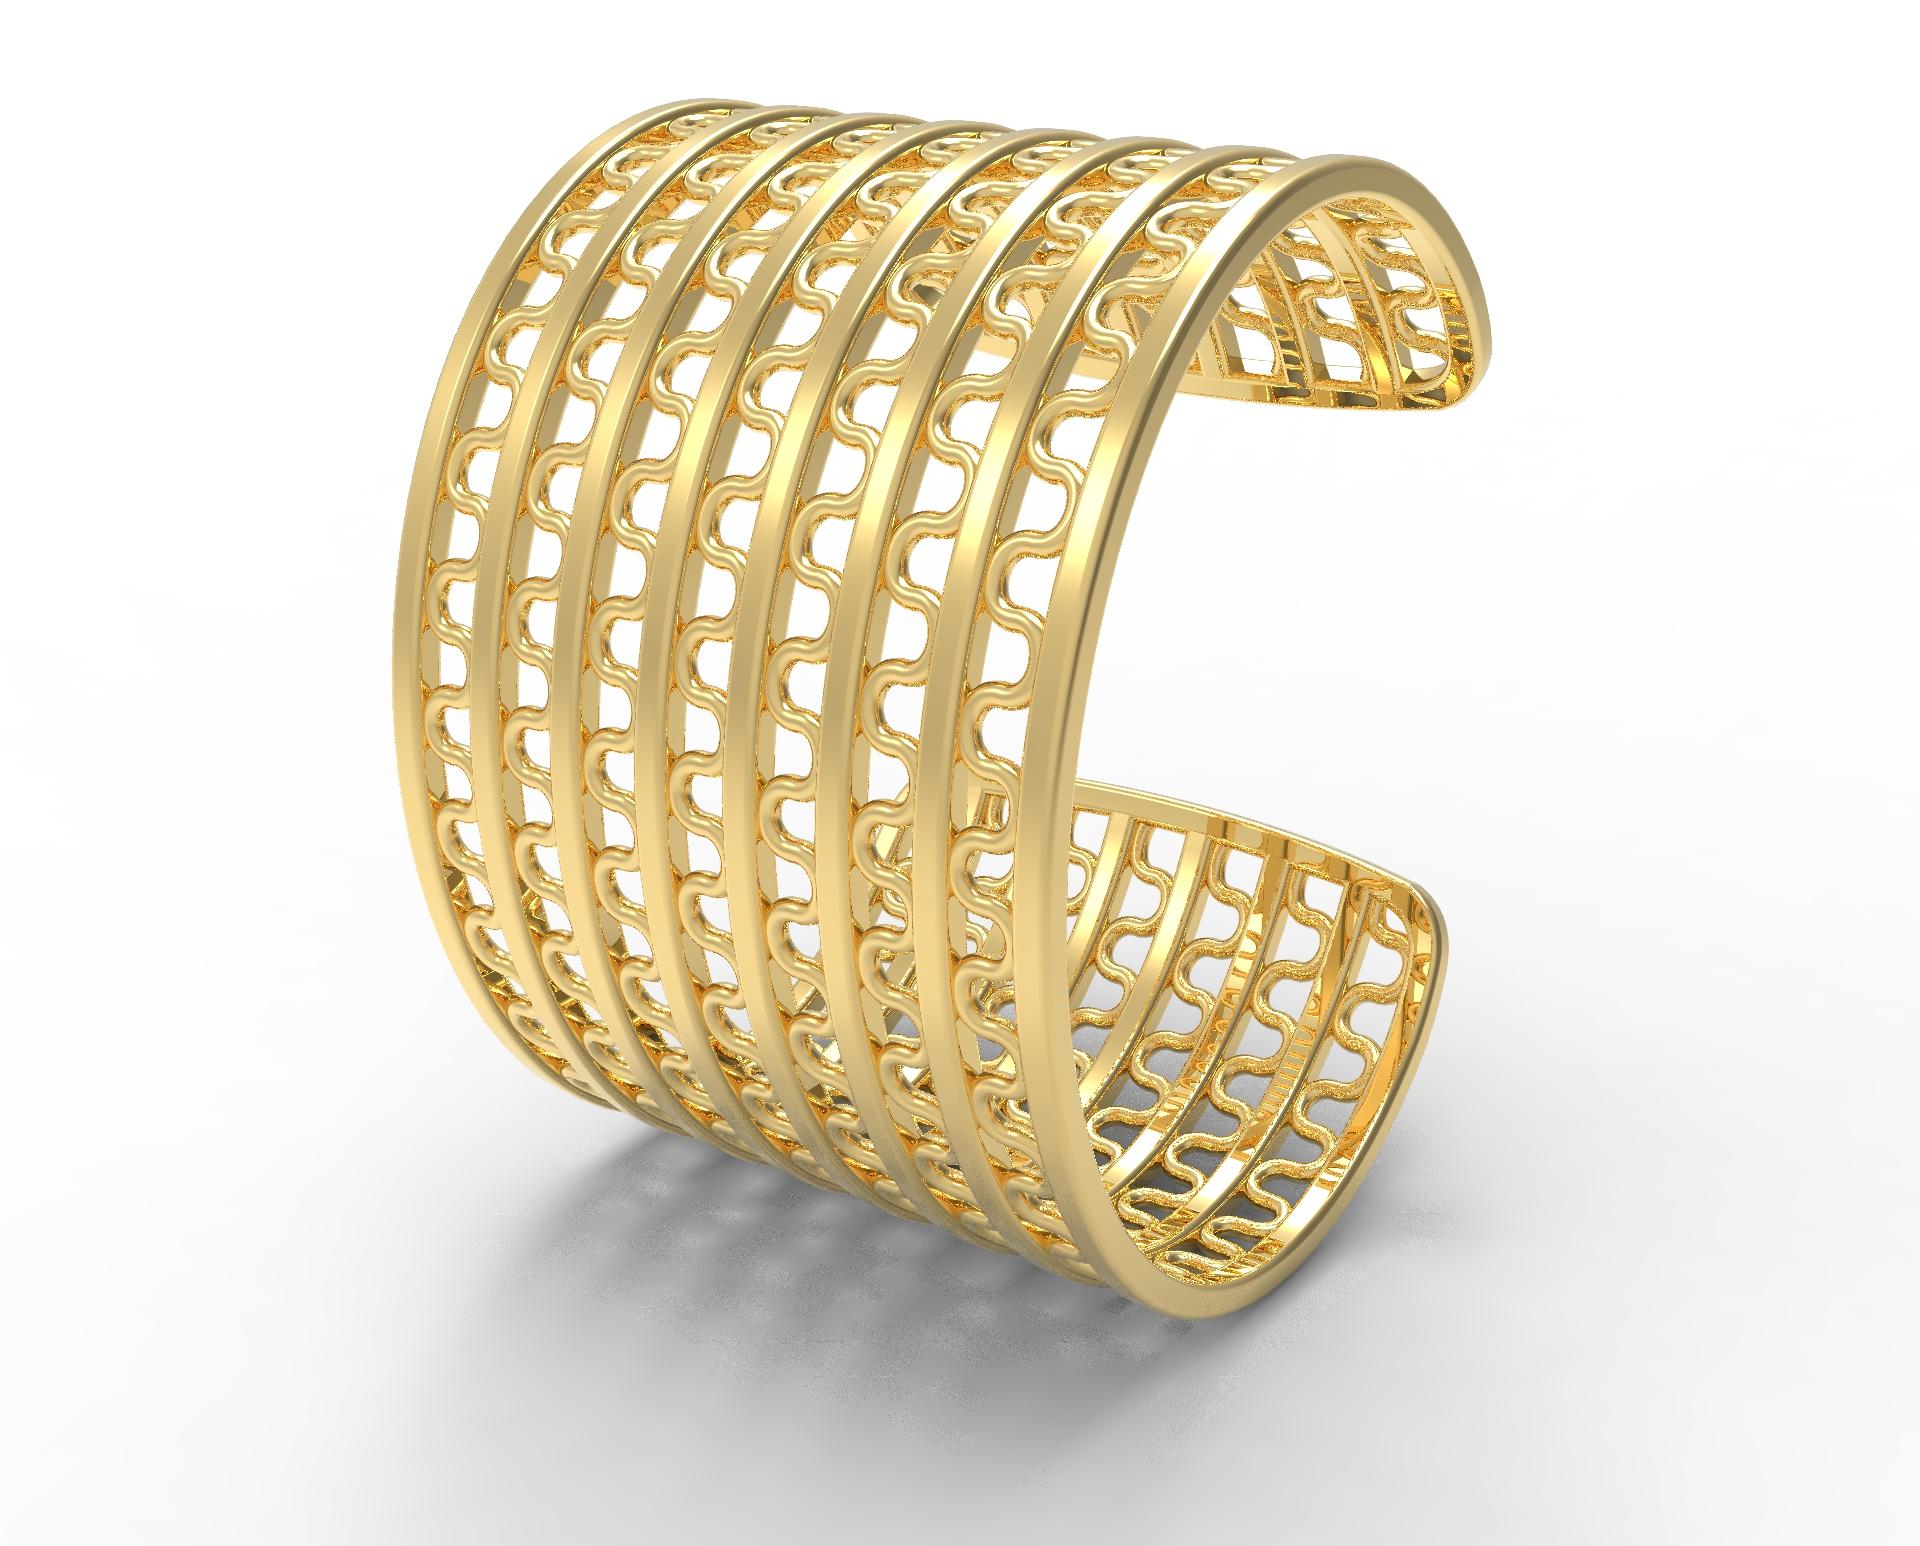 22 Karat Yellow Gold Woven Cuff Bracelet by ROMAE Jewelry - Inspired by Ancient Roman Designs. Our Clementia cuff bracelet is based on an ancient Etruscan example from the seventh century BC. Its strong architectural structure is softened by the